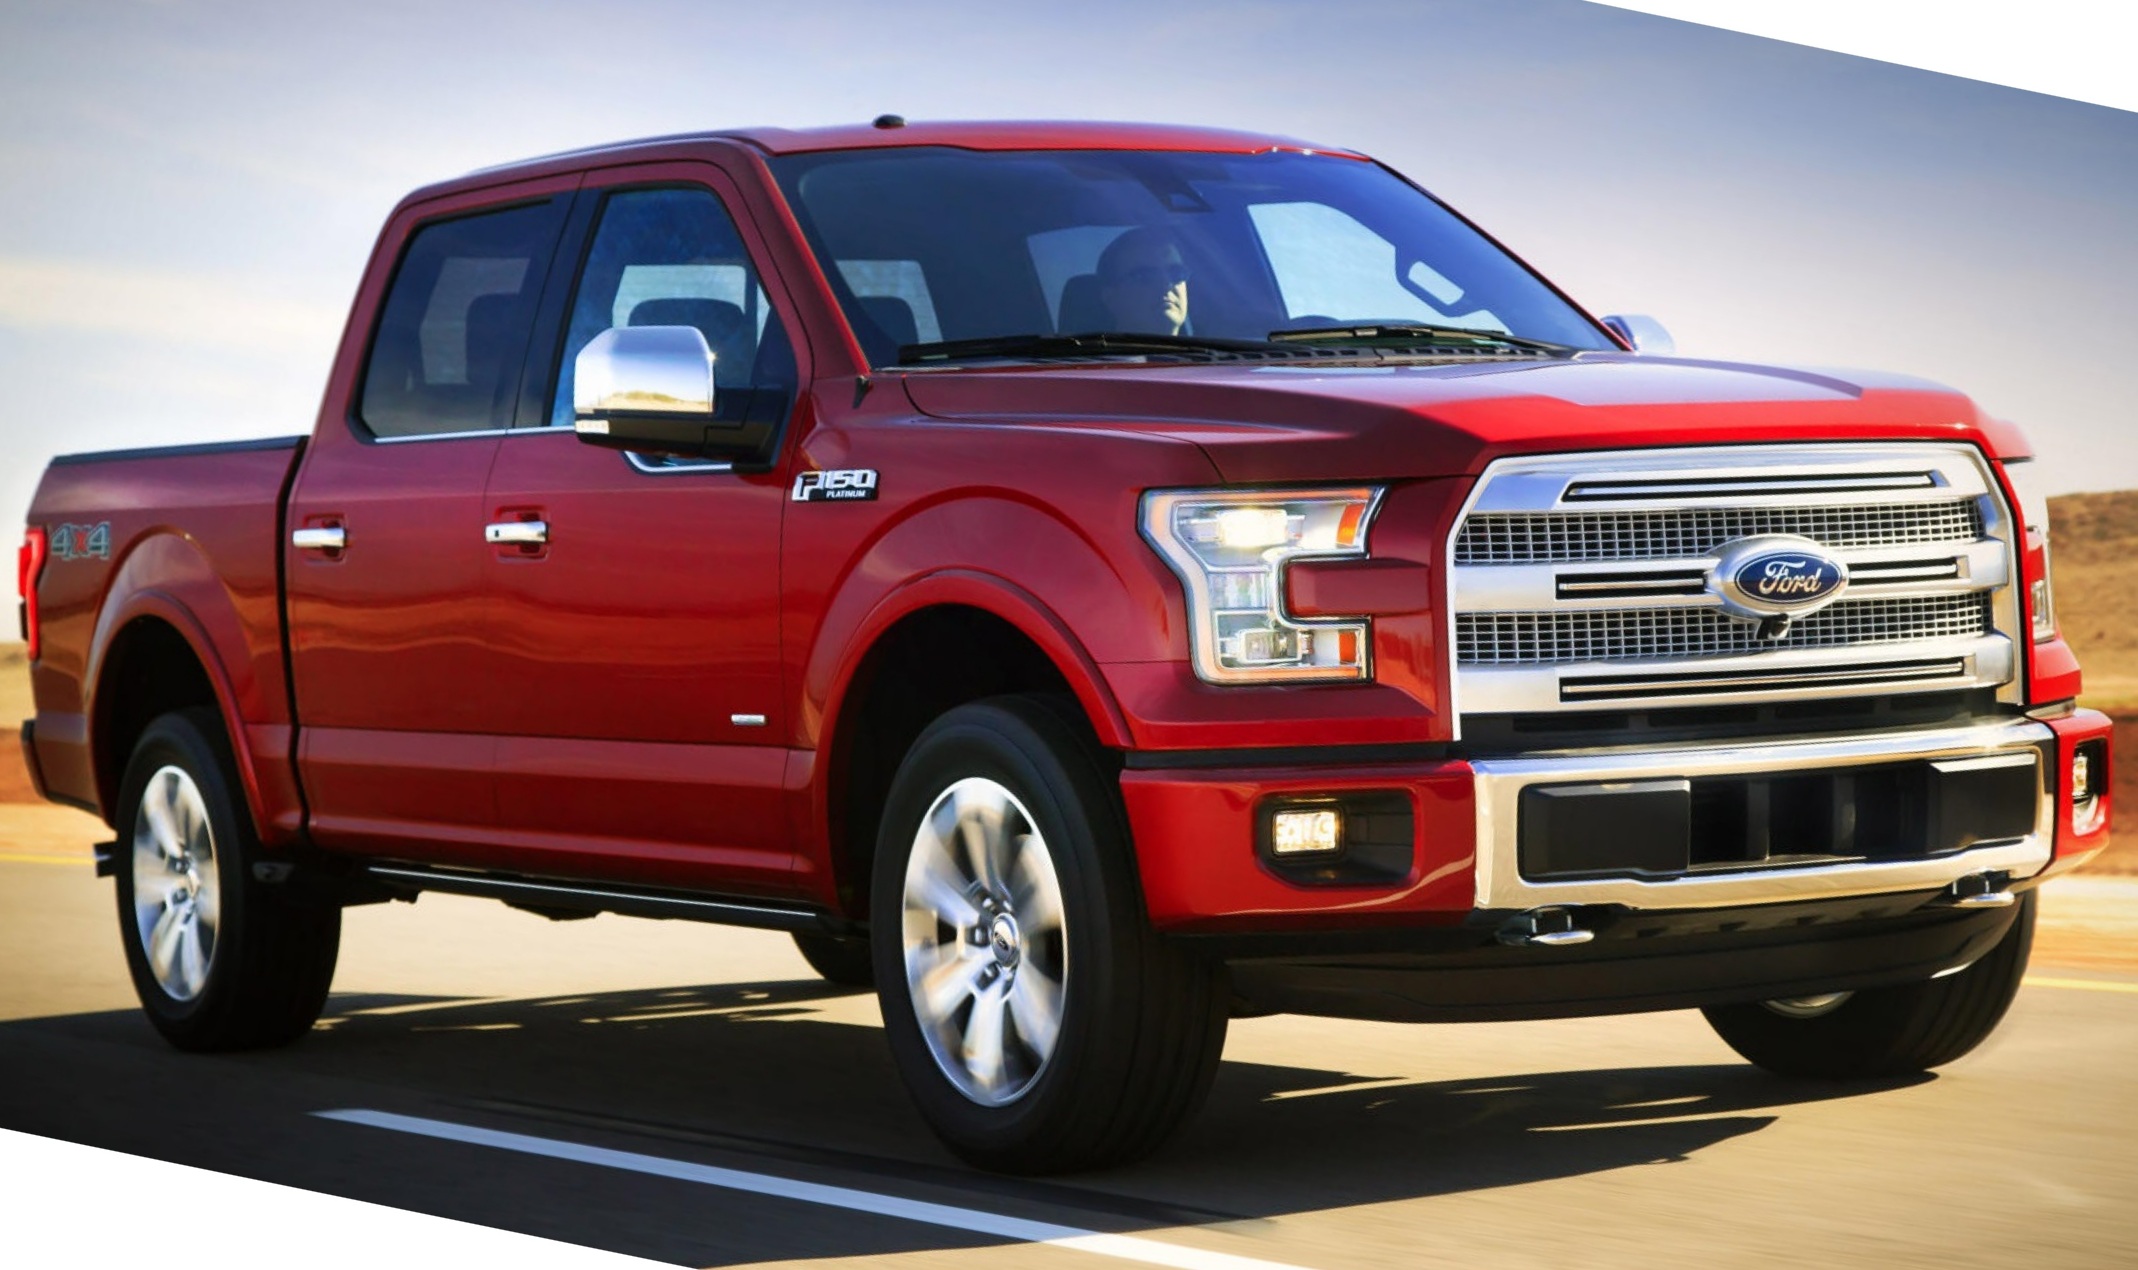 2015 Ford F 150 News 2015 ford f 150 Wallpapers 10 Free HD